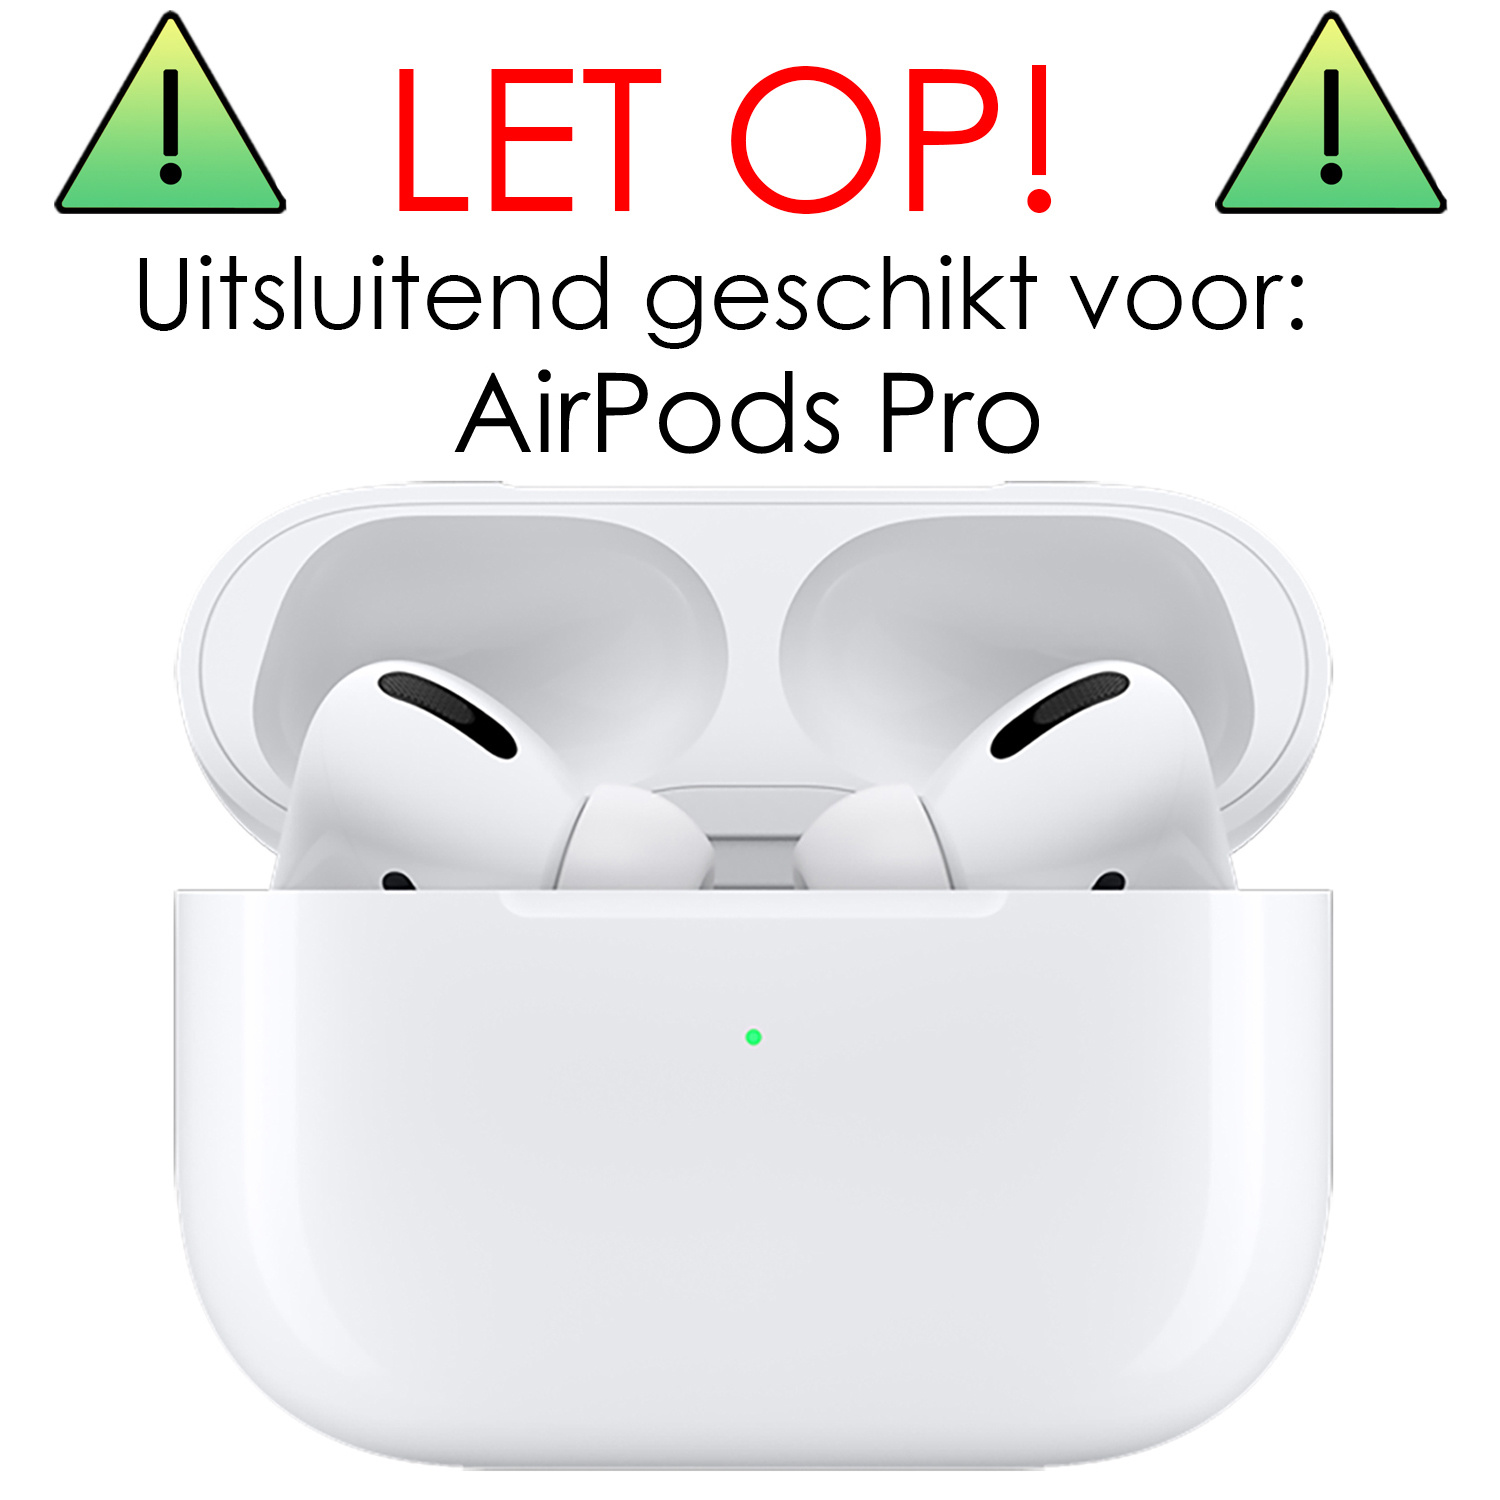 NoXx Hoes Geschikt voor Airpods Pro Hoesje Cover Silicone Case Hoes - Paars